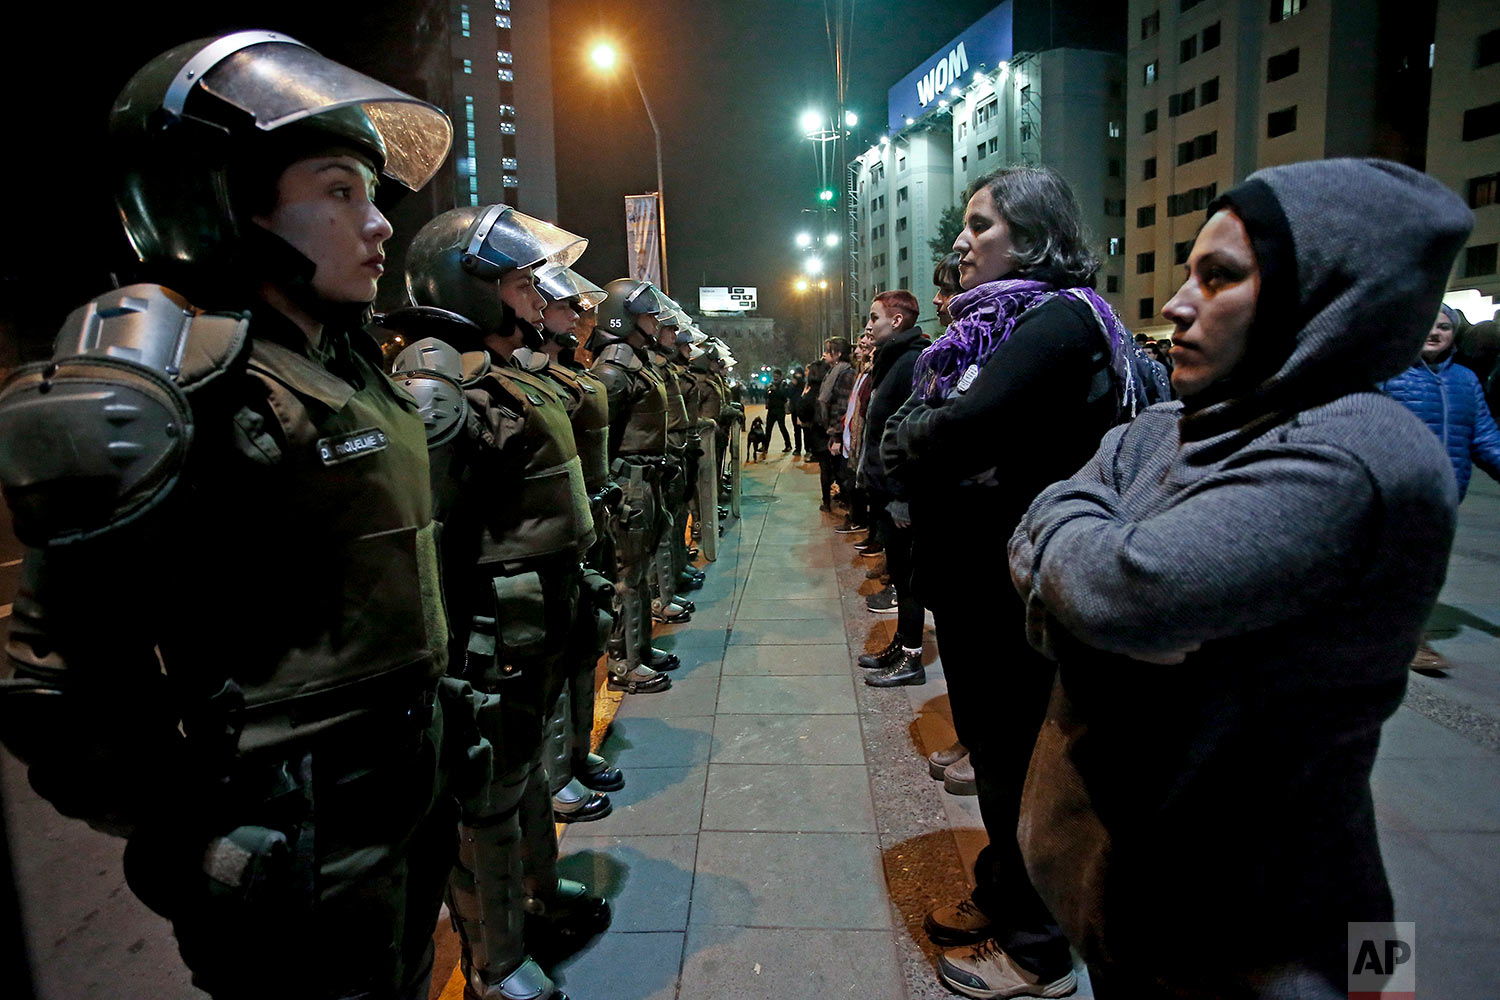  In this June 1, 2018 photo, women face a line of policewomen at the start of a feminist march in Santiago, Chile. 
A seemingly light ruling against a university professor for sexual harassment outraged women across the country who demanded a stronge